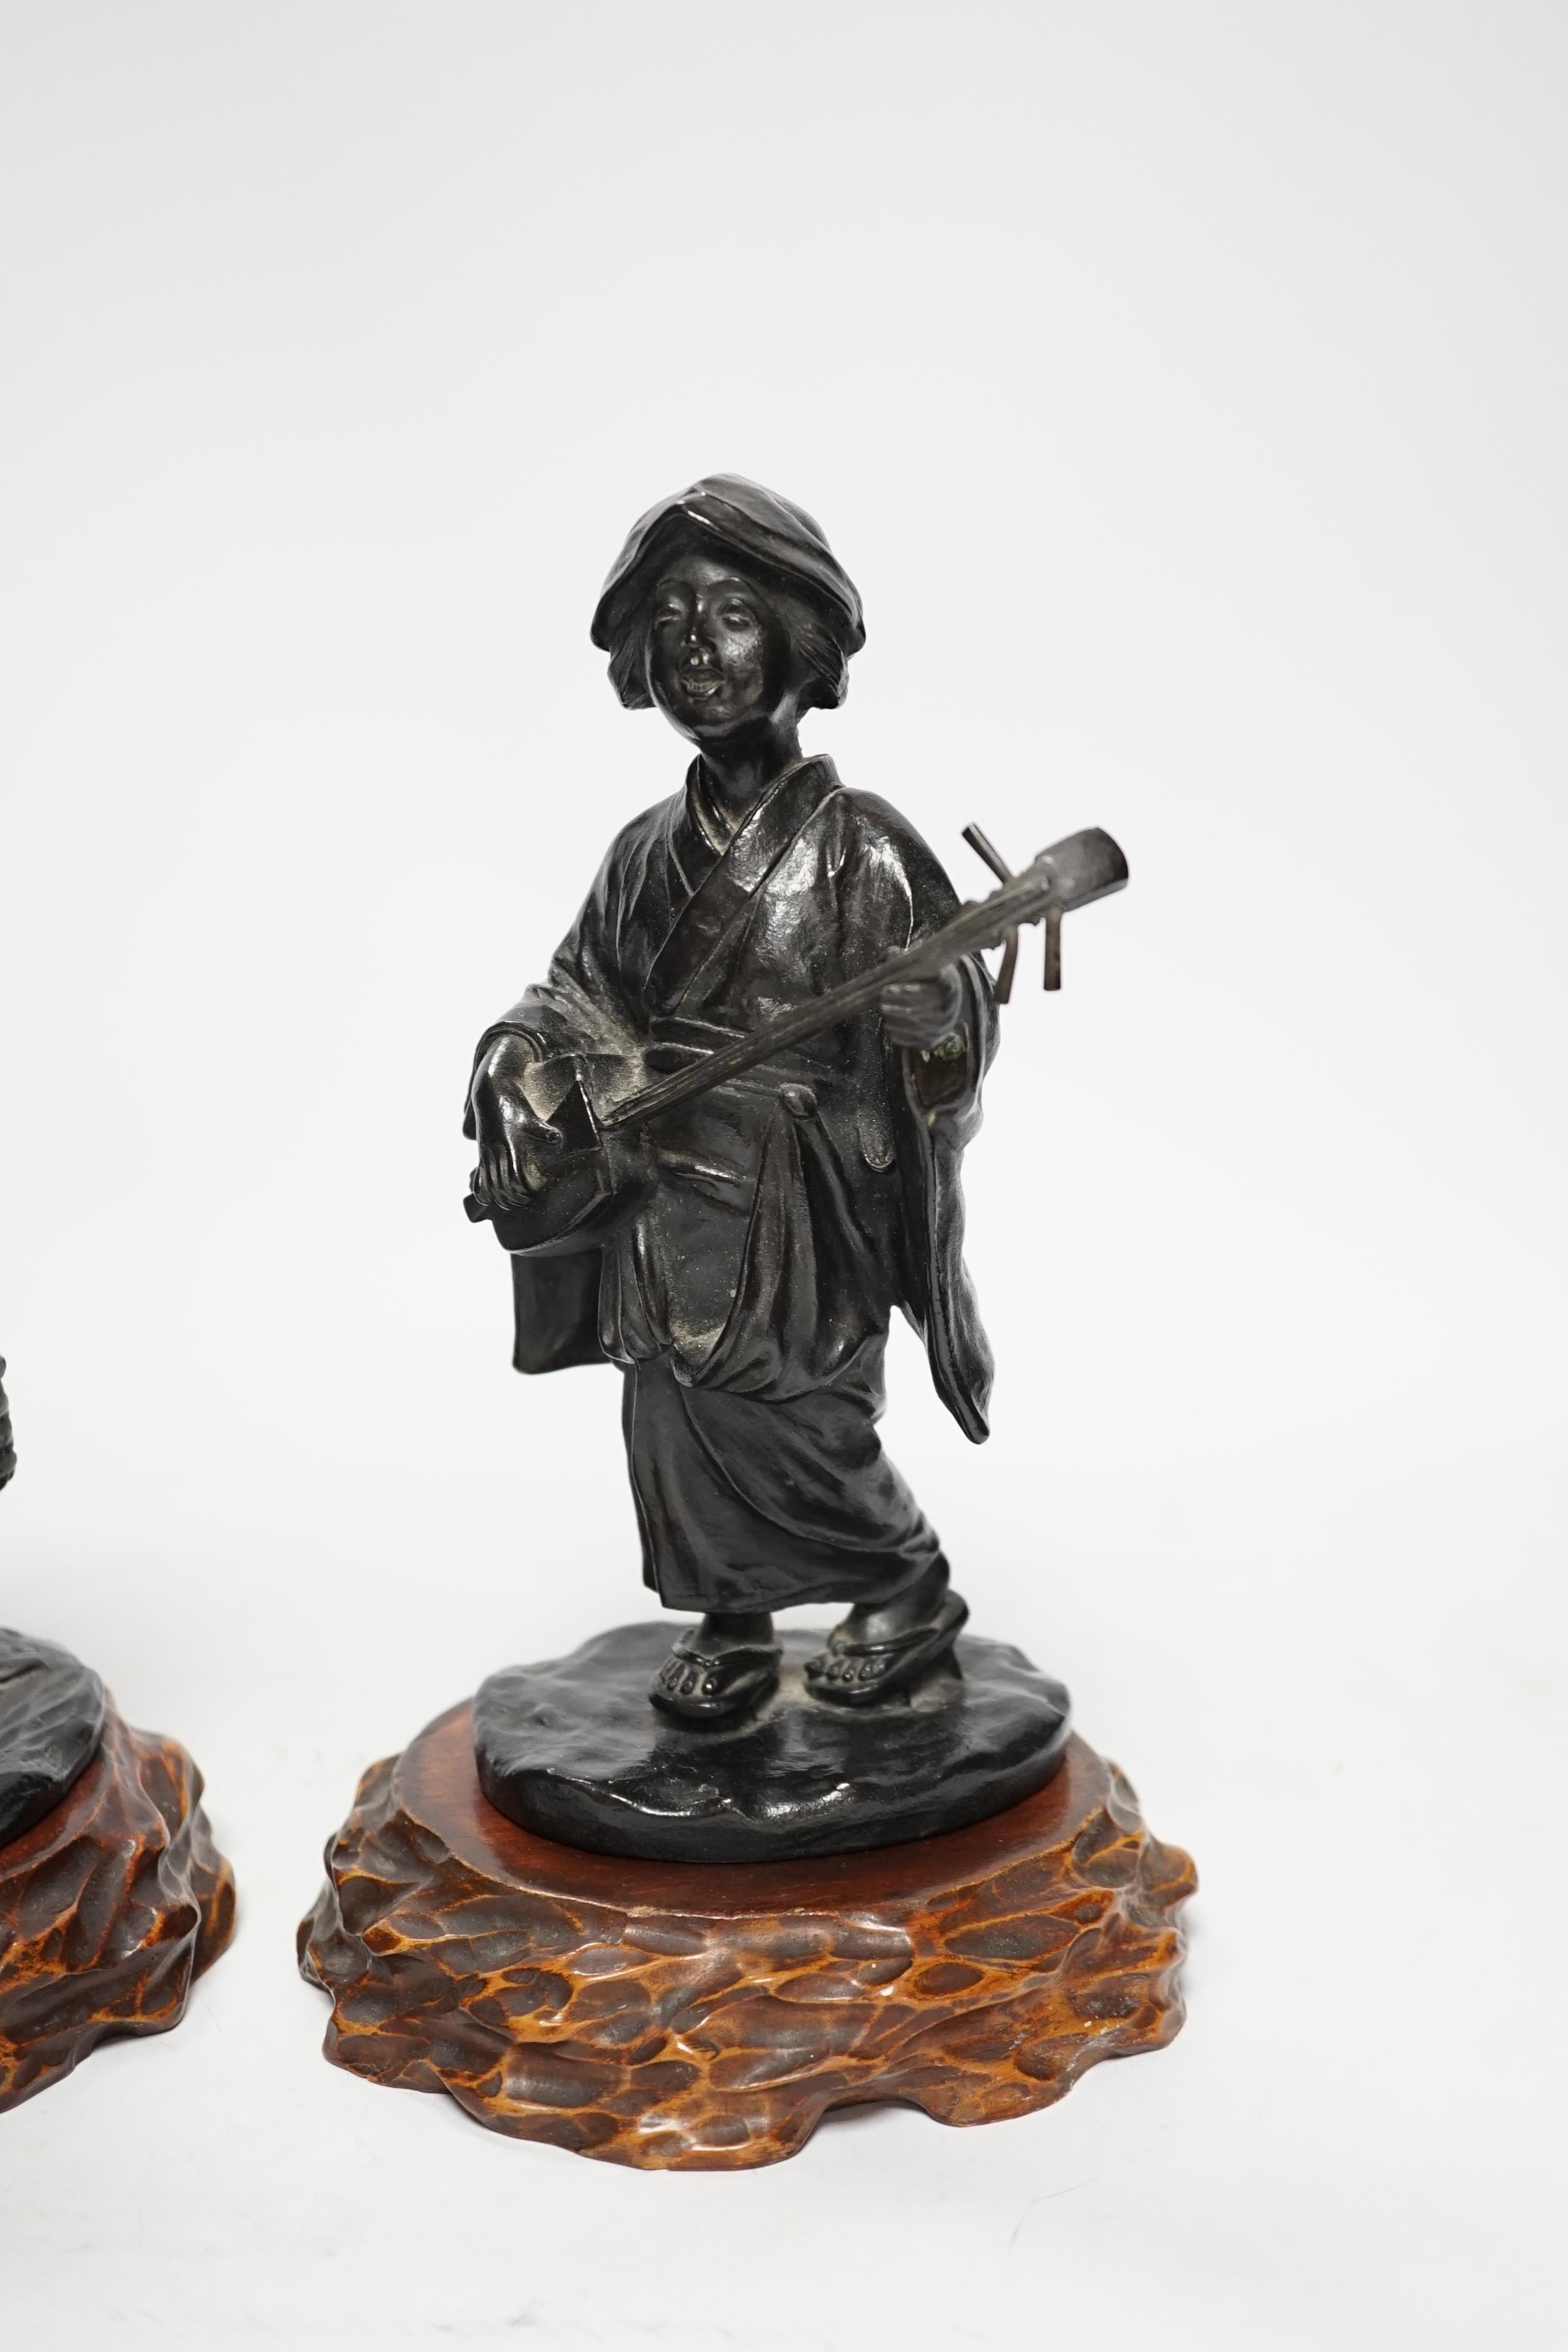 Two Japanese Meiji period bronzes, a water carrier and a woman playing a Shamisen, both signed, each with wooden plinths, largest 22cm high